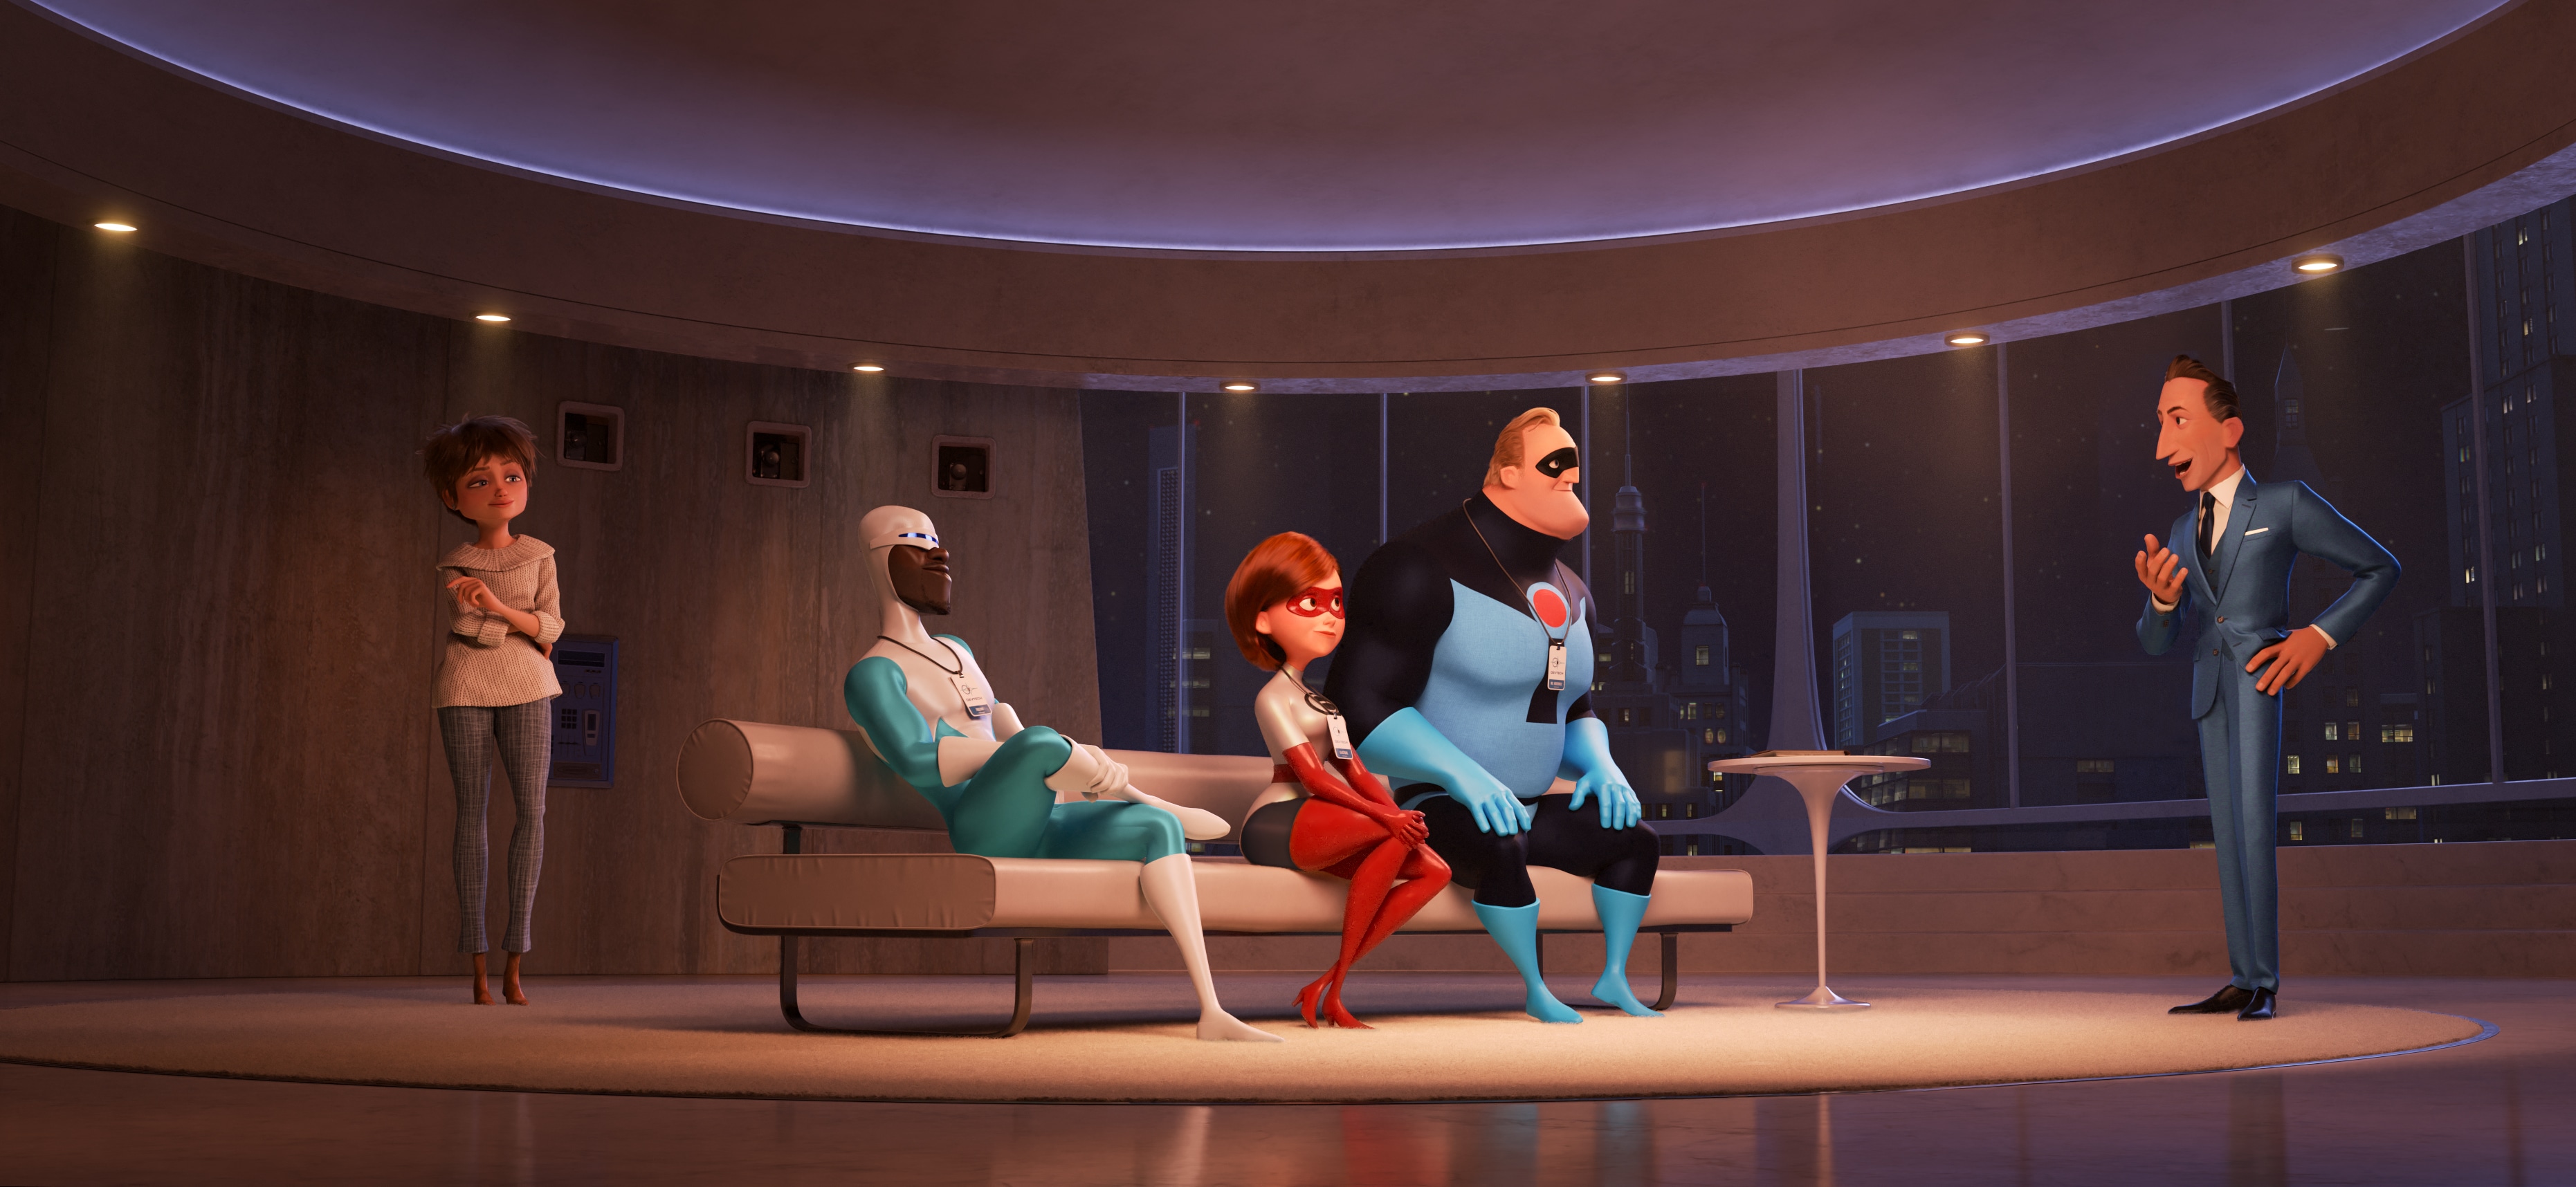 FREE Coloring Pages, Activity Sheets + More for Incredibles 2 #Incredibles2